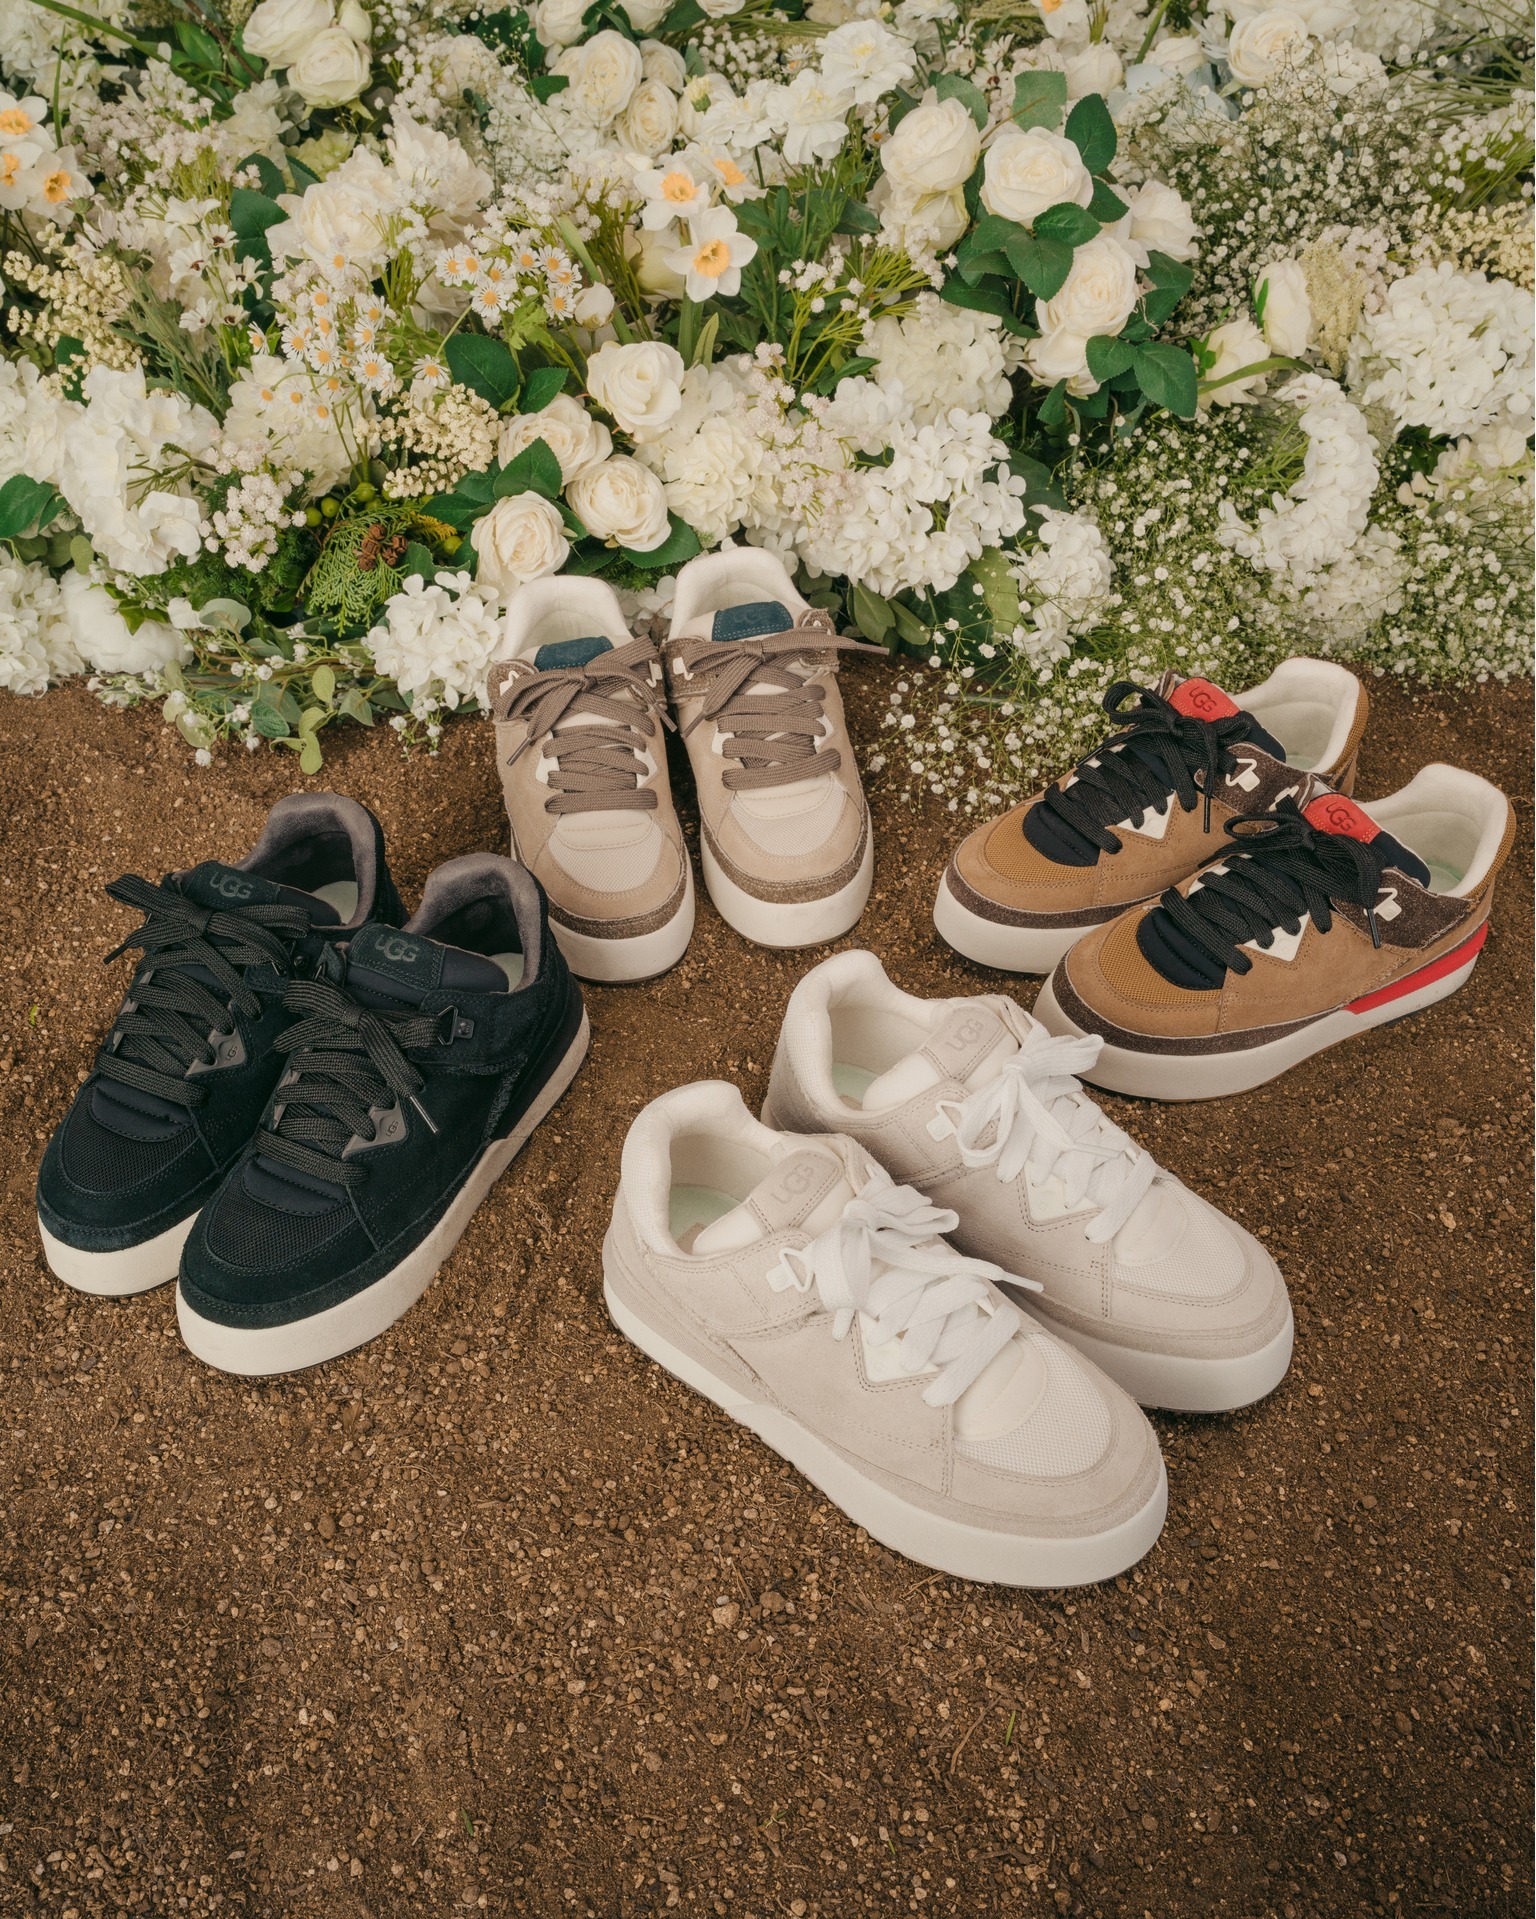 UGG's Goldencush sneaker collection in beige, brown, black, and white suede colorways